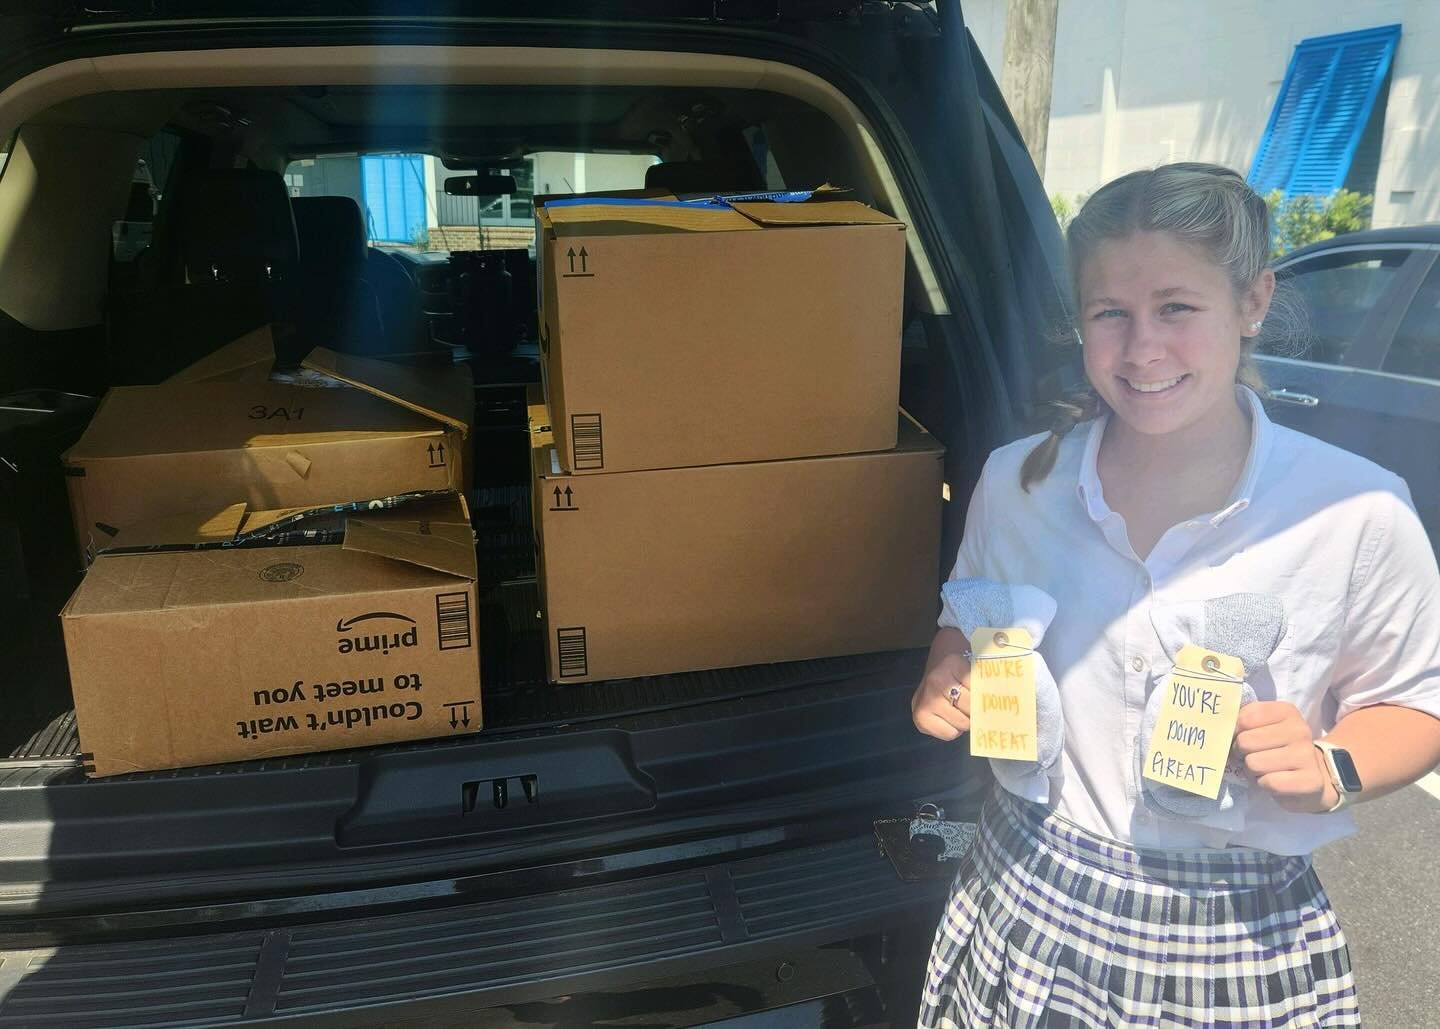 Greysen Asterman, a student at Calvary Day School, collected 1,800 pairs of socks for Union Mission, each paired with an encouraging note. This marks her second year of dedicated service. Join us in celebrating her commitment to helping others! 🧦💖 